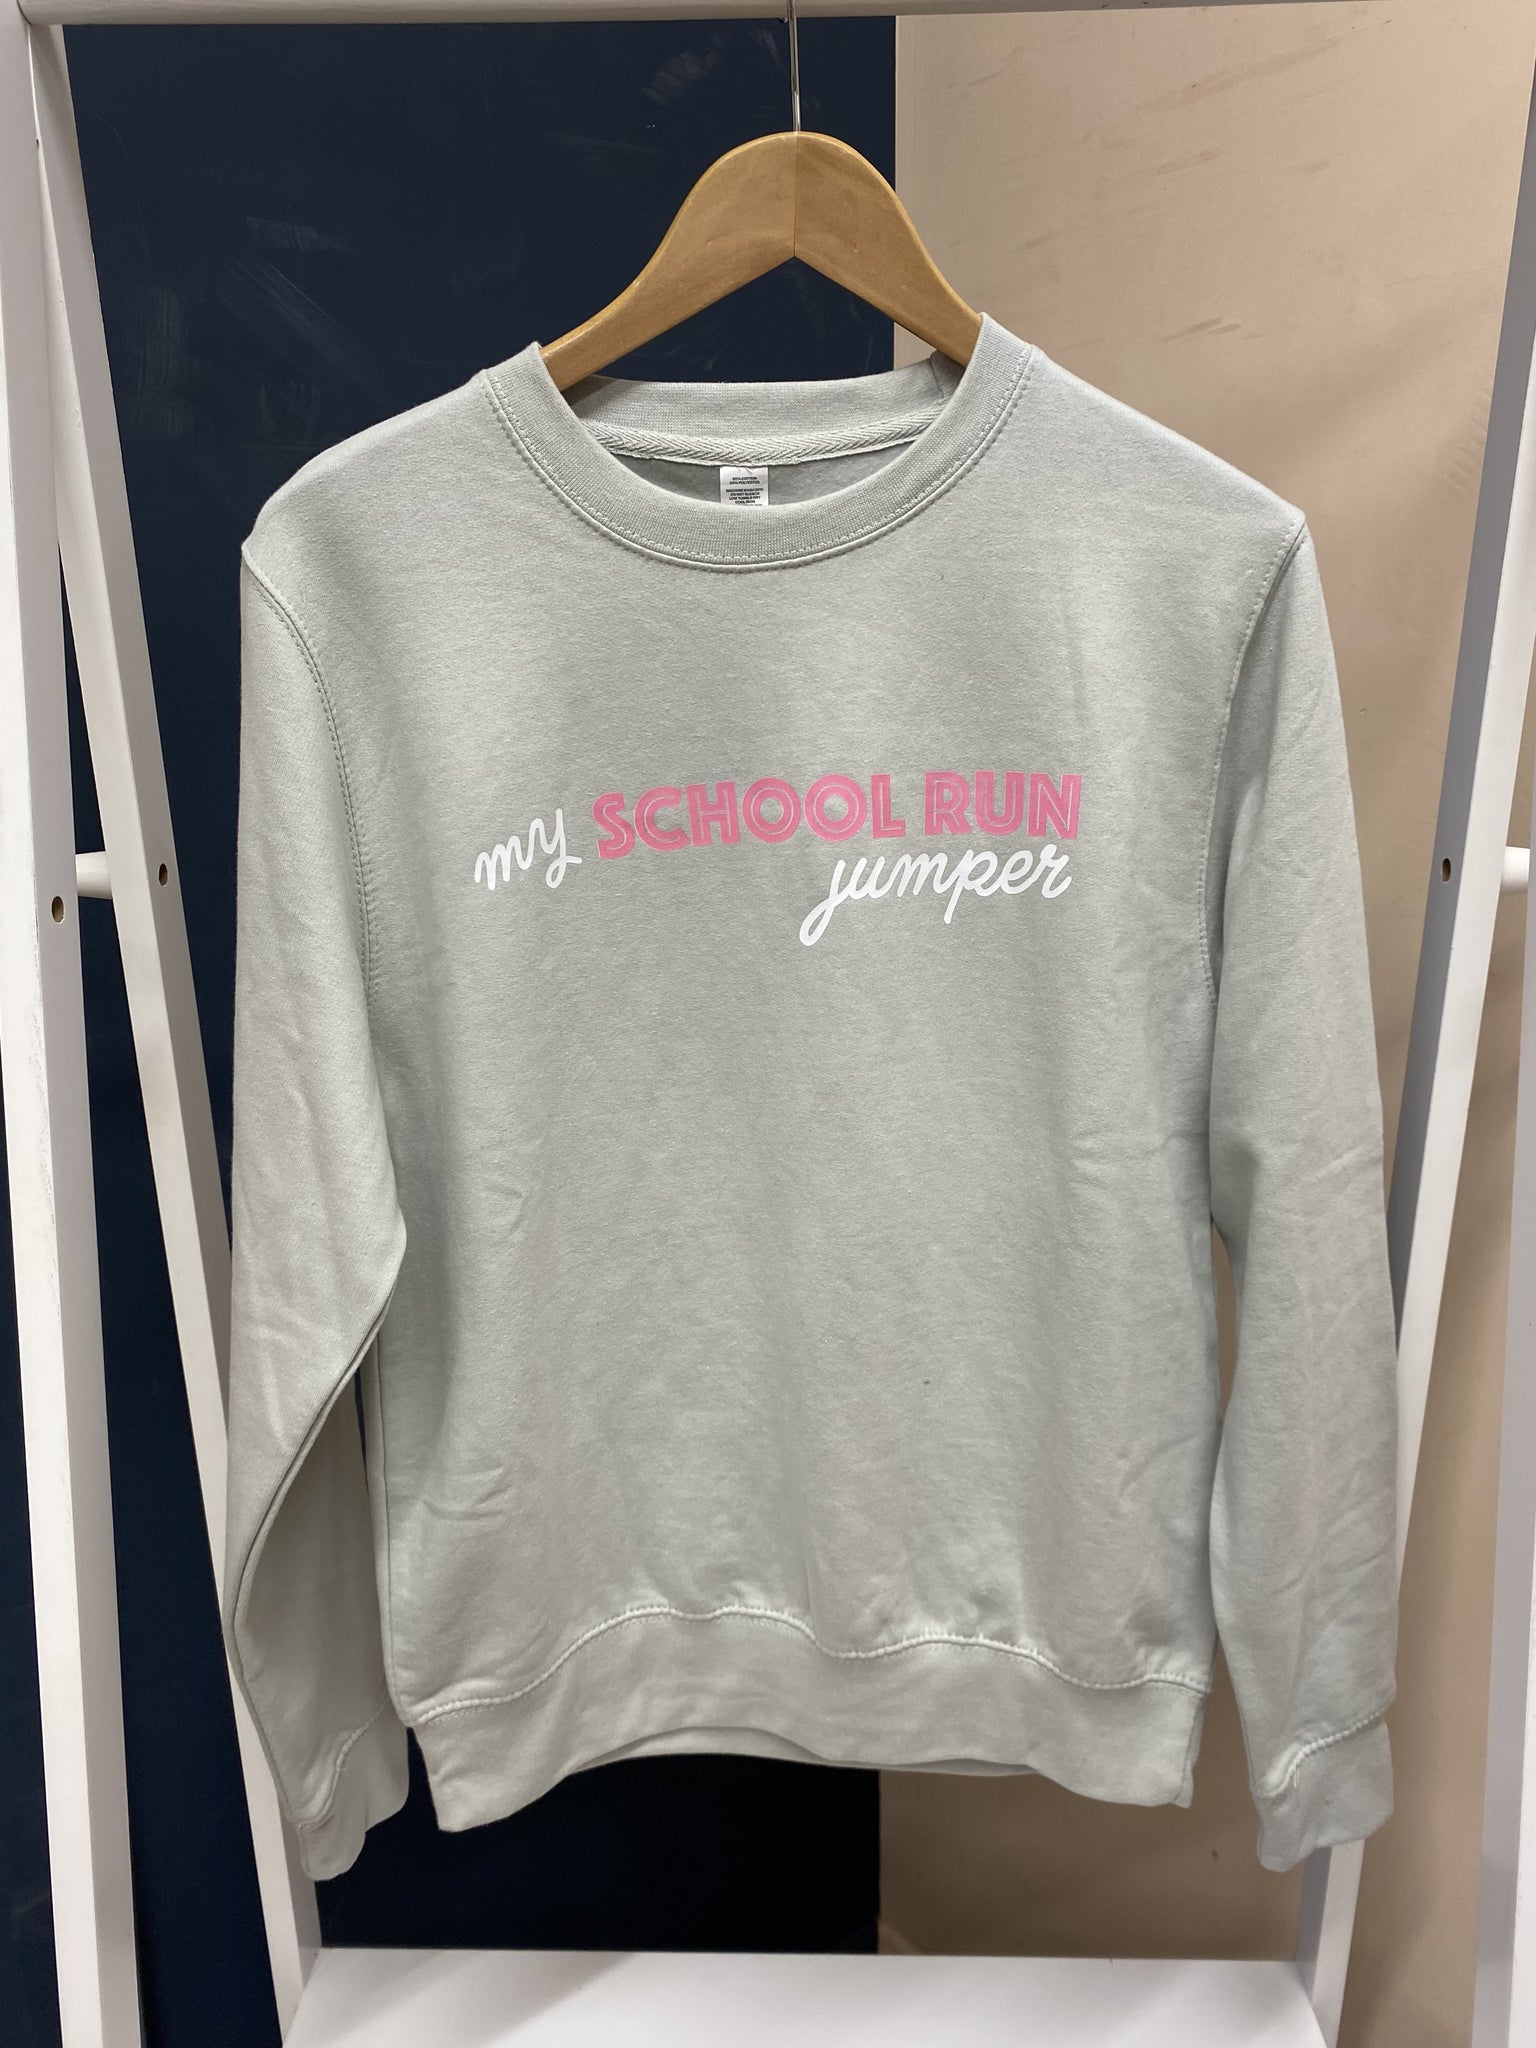 SAMPLE SALE 'My School Run Jumper' Sweater, Moondust Grey with Pink and White Vinyl, S. Discoloured sleeve